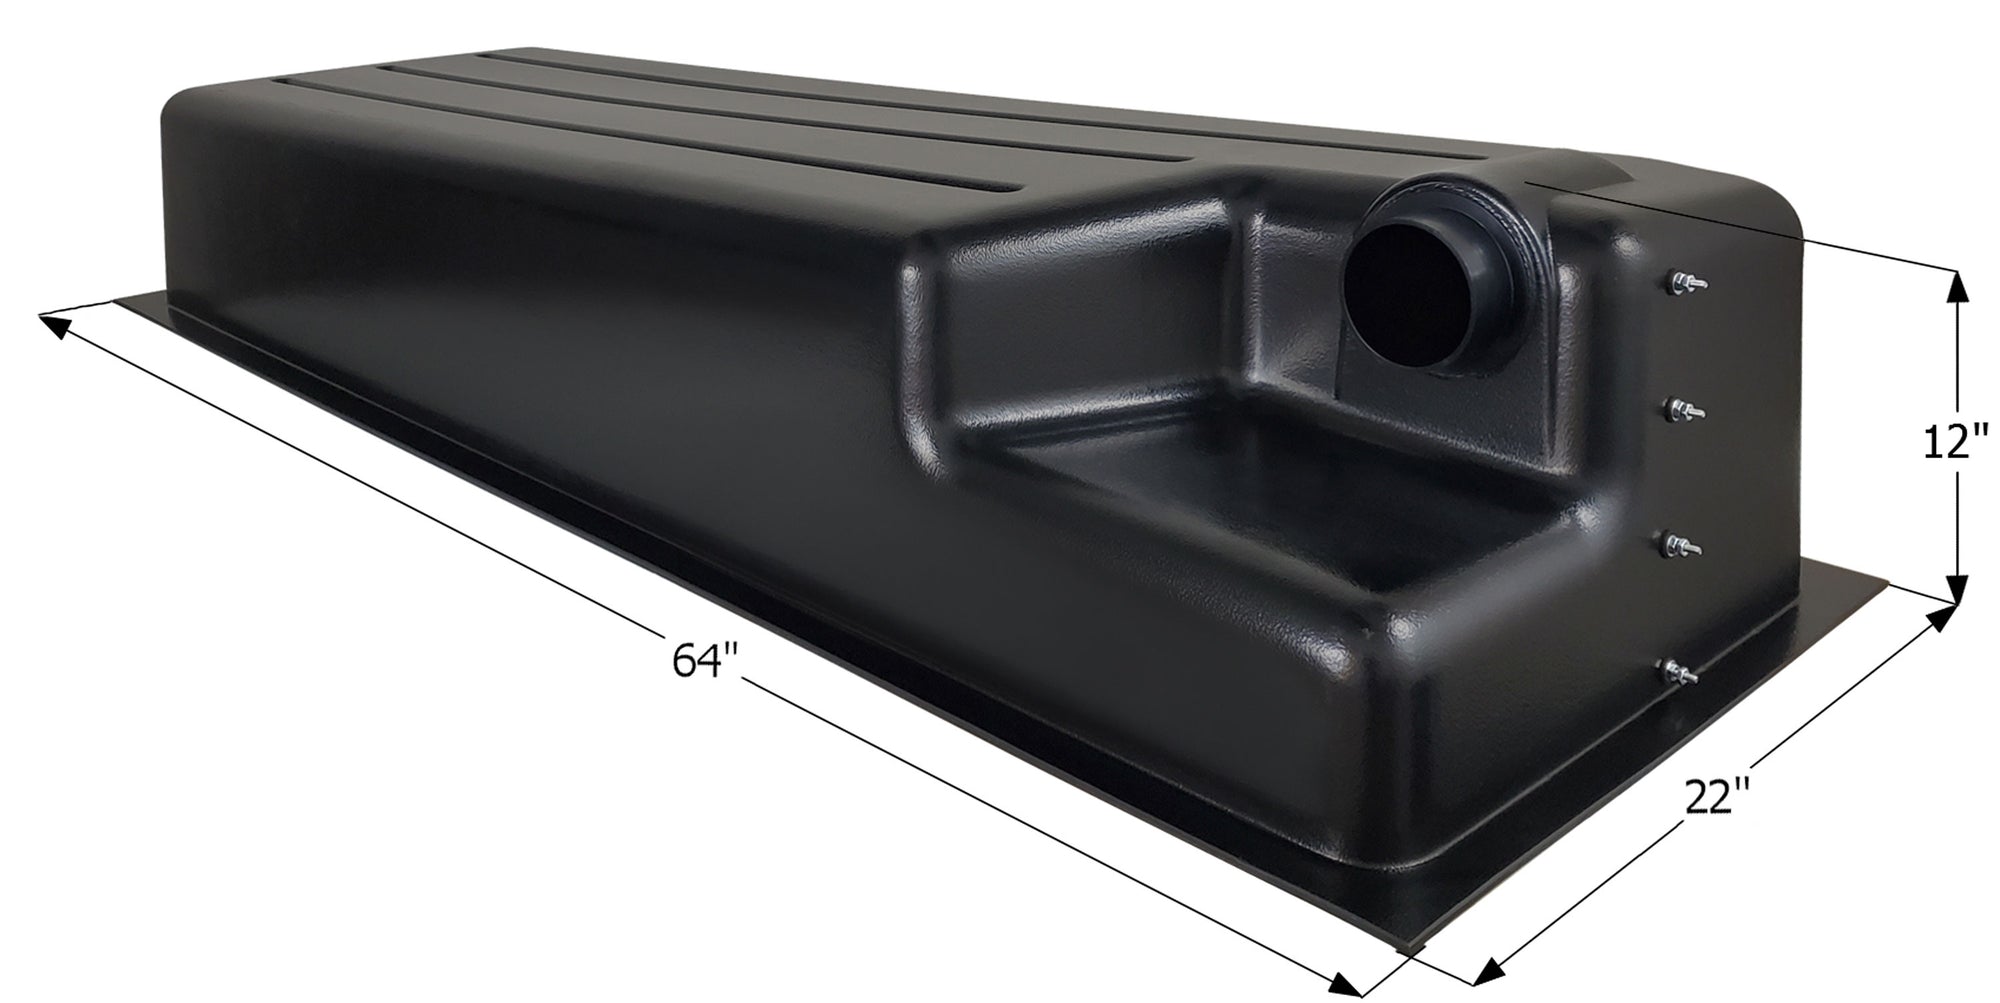 Icon 12420 Holding Tank with Recessed Drain HT512RE - 64" x 22" x 12", 44 Gallon